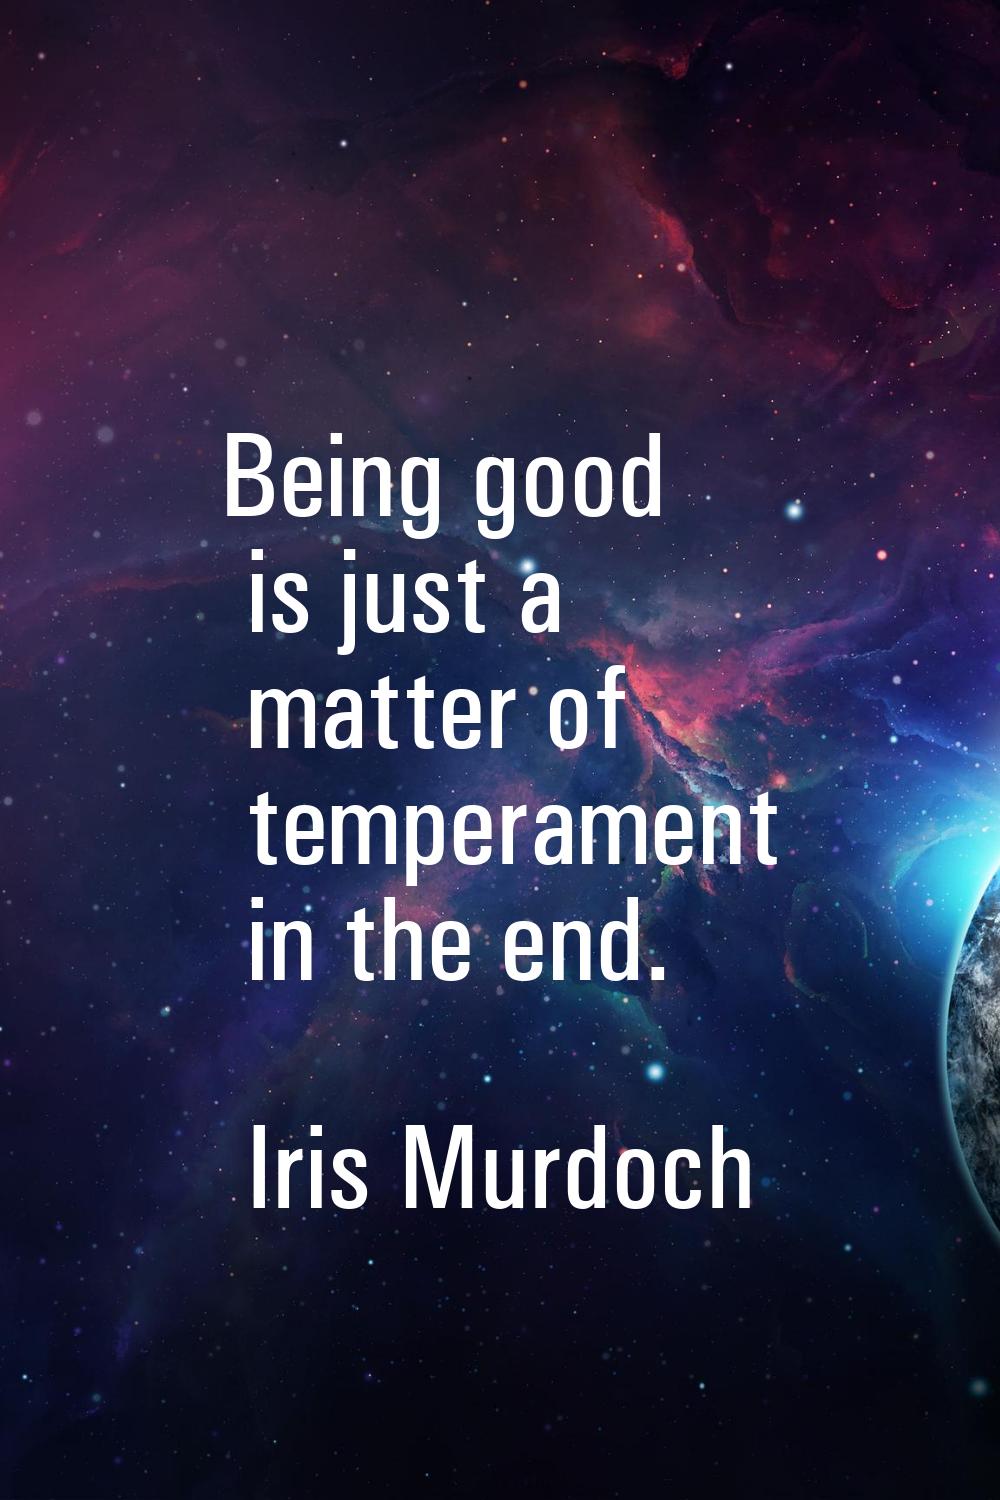 Being good is just a matter of temperament in the end.